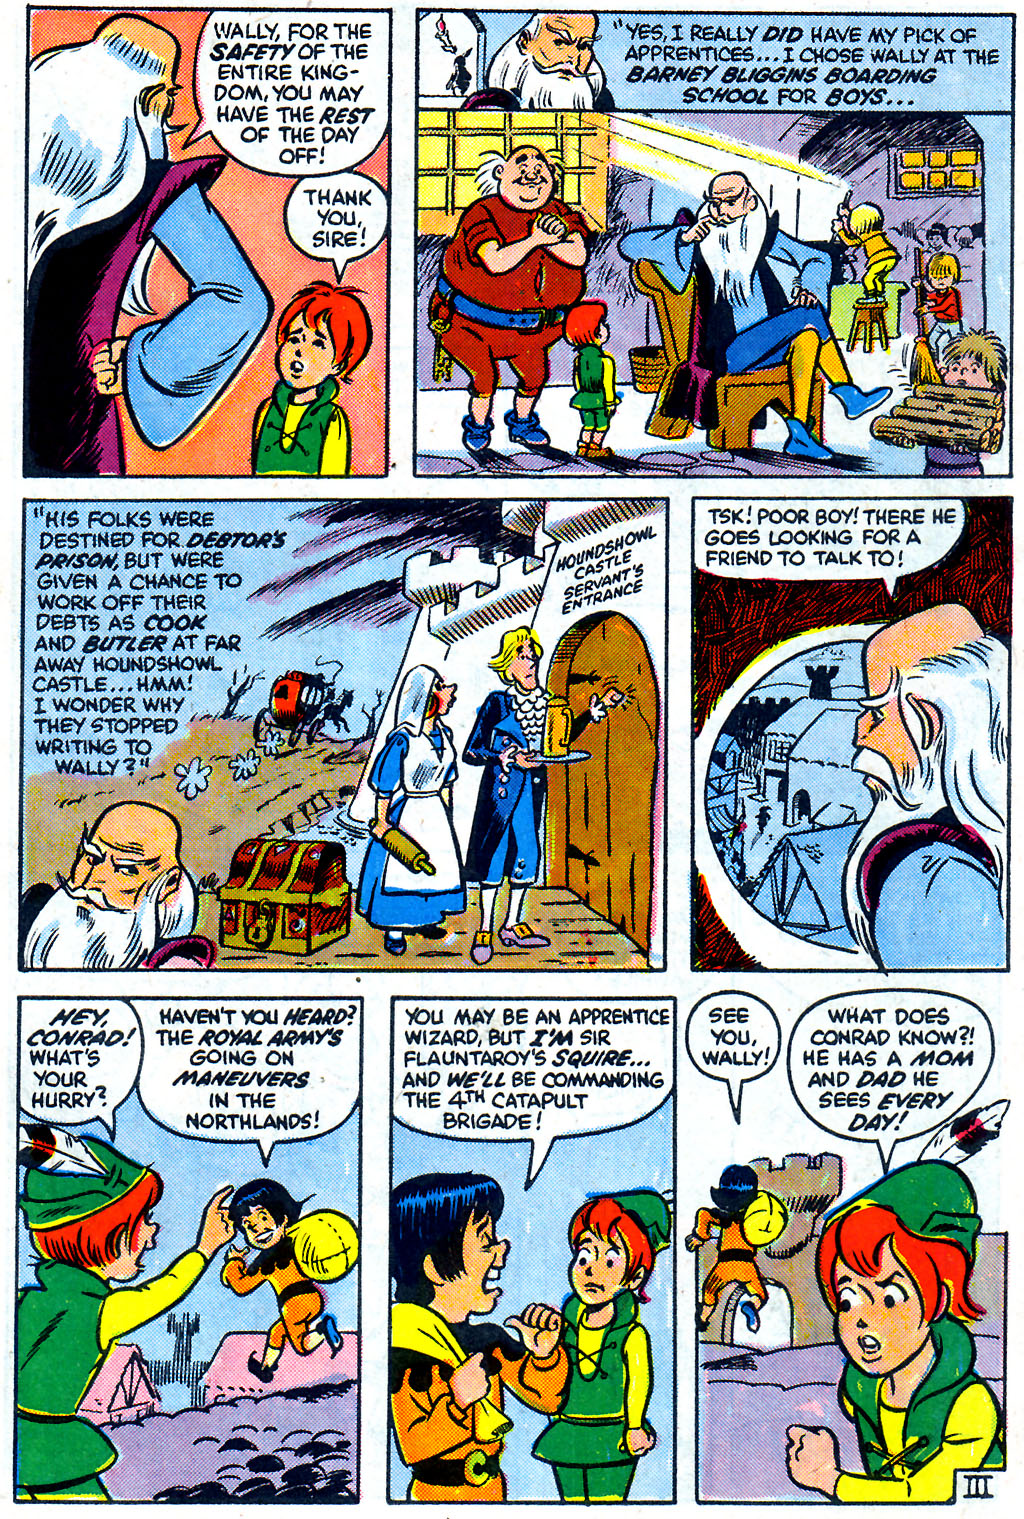 Read online Wally the Wizard comic -  Issue #3 - 4